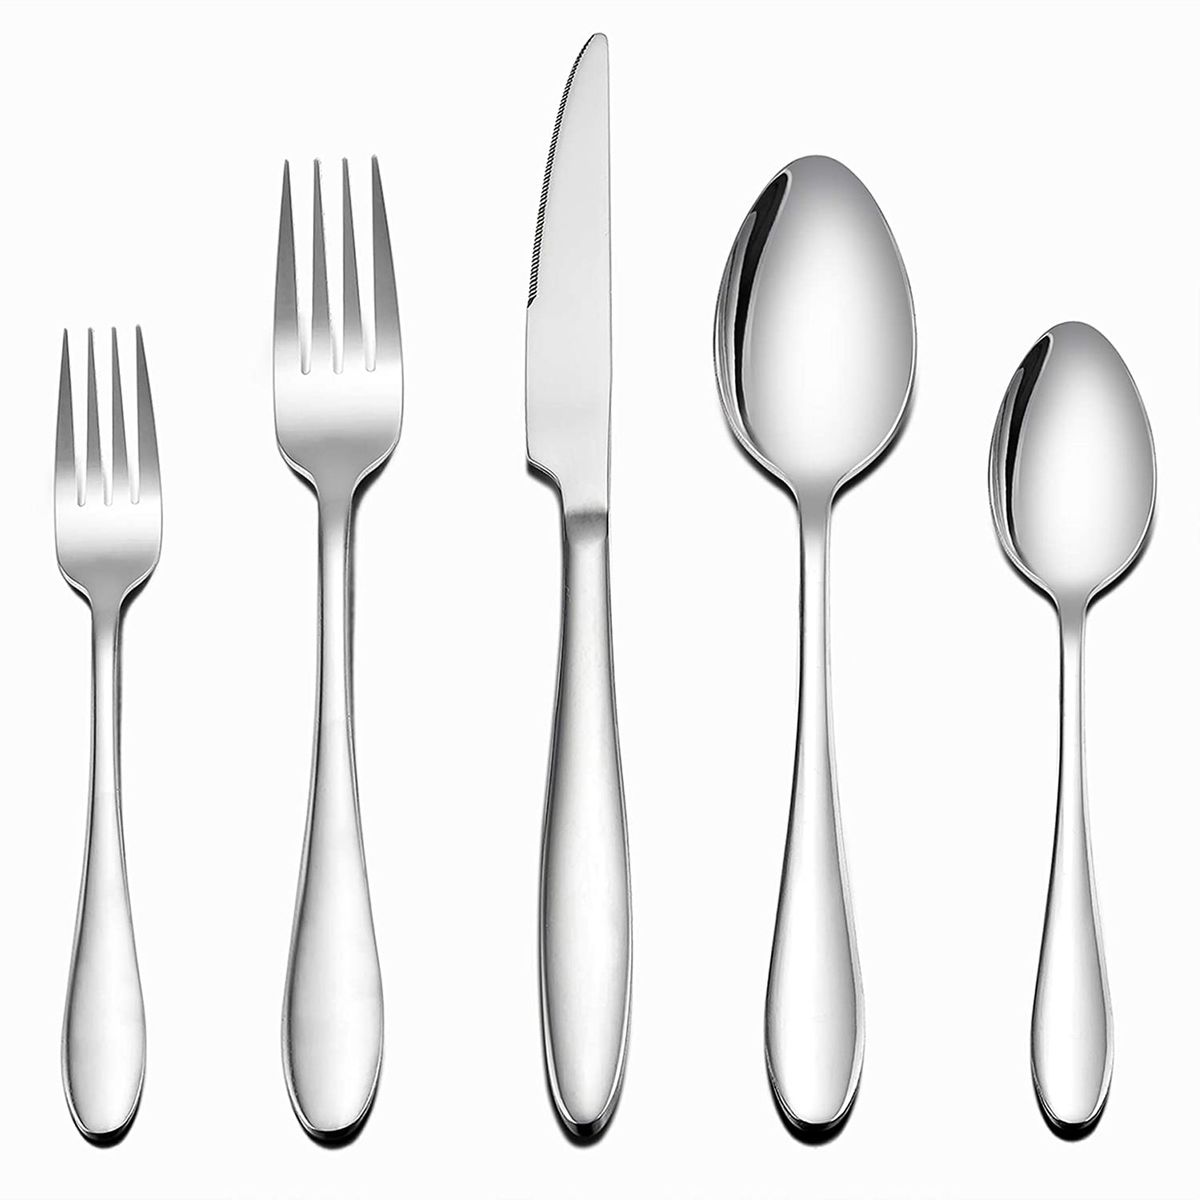 Silverware Set 20-Piece Dishwasher Safe Tableware Eating Utensils Include Knife/Fork/Spoon Mirror Polished Wildone Stainless Steel Flatware Cutlery Set Service for 4 